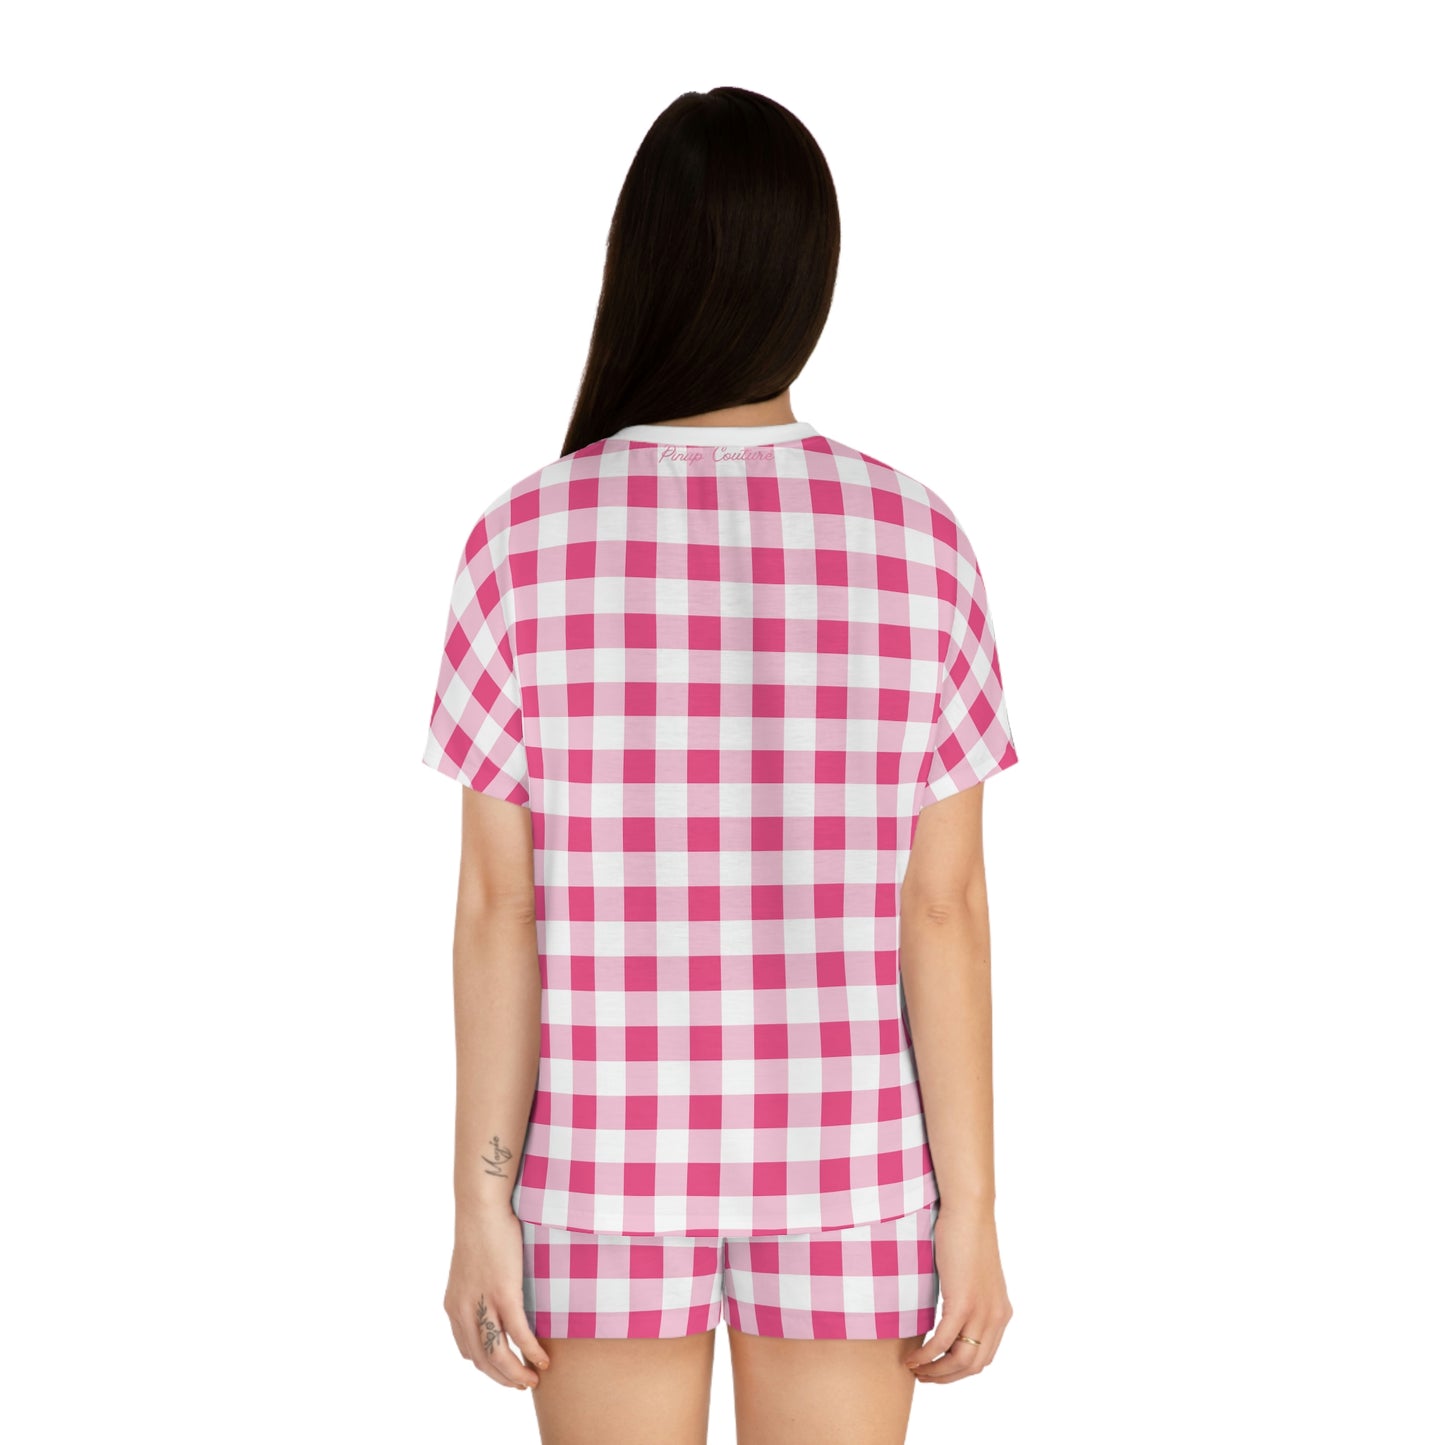 TGIF Sleepover PJs in Everything Nice Pink Gingham Tee & Pajama Shorts-Set | Pinup Couture Relaxed